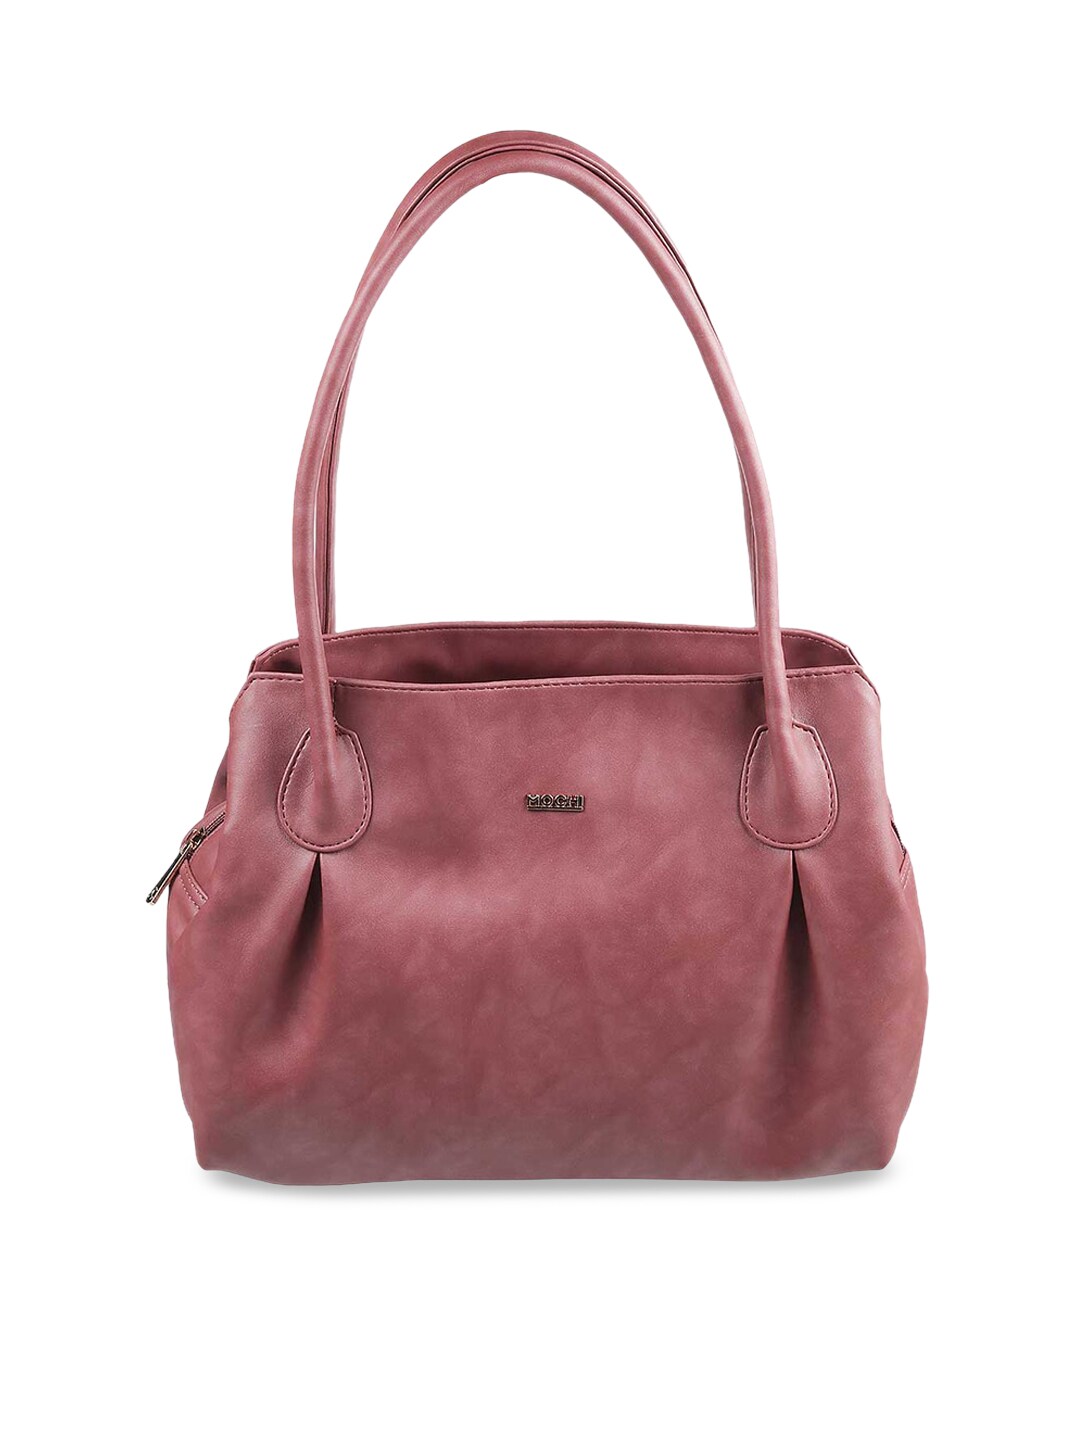 Mochi Peach-Coloured Structured Shoulder Bag Price in India